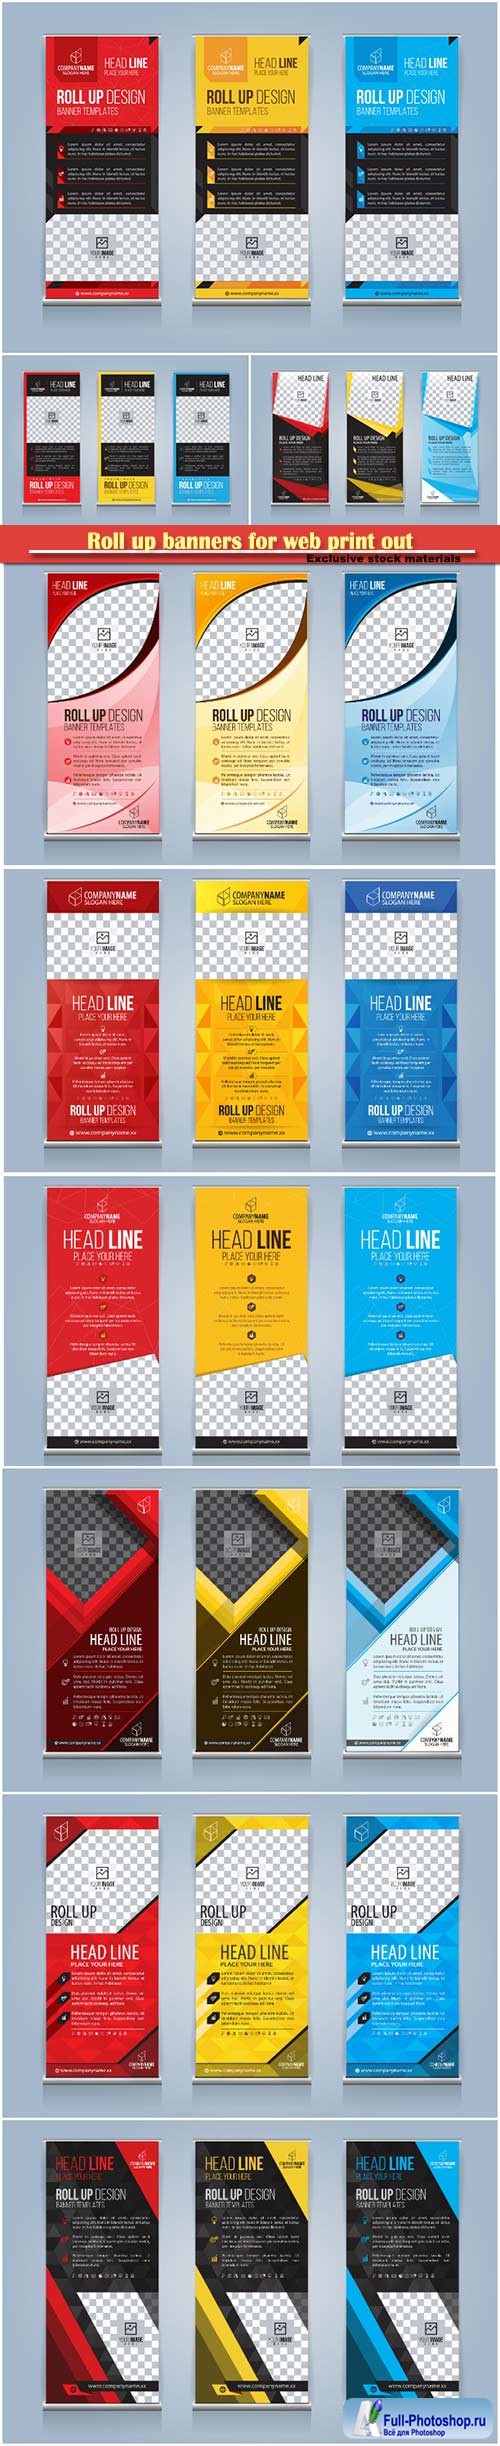 Roll up banners for web and advertisement print out, vector flyer handout design # 2